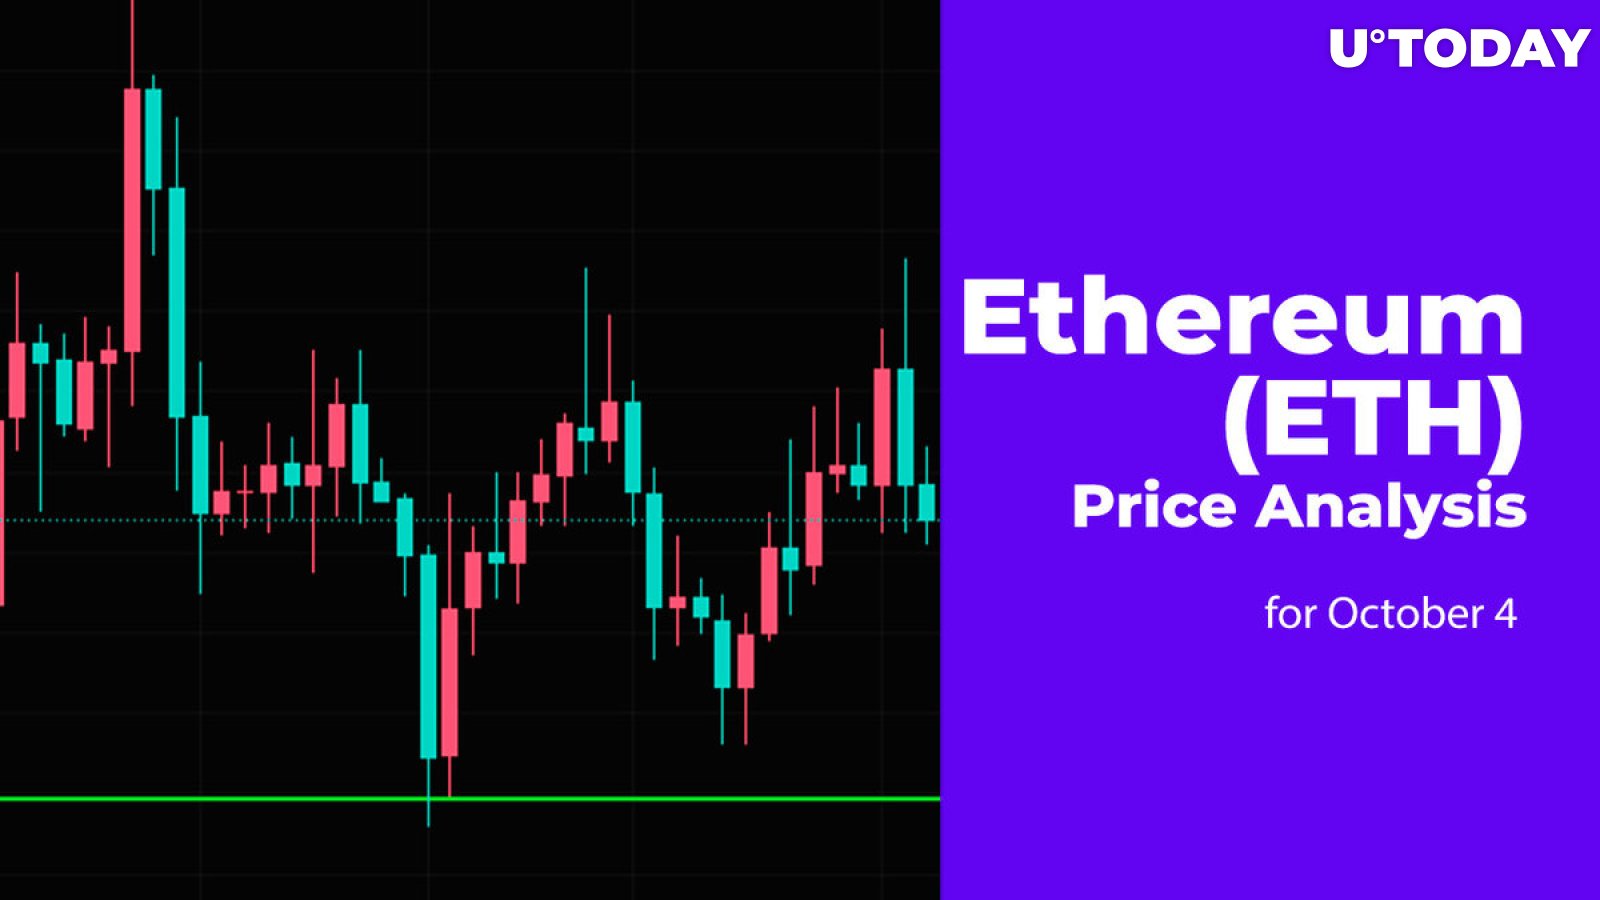 Ethereum (ETH) Price Analysis for October 4